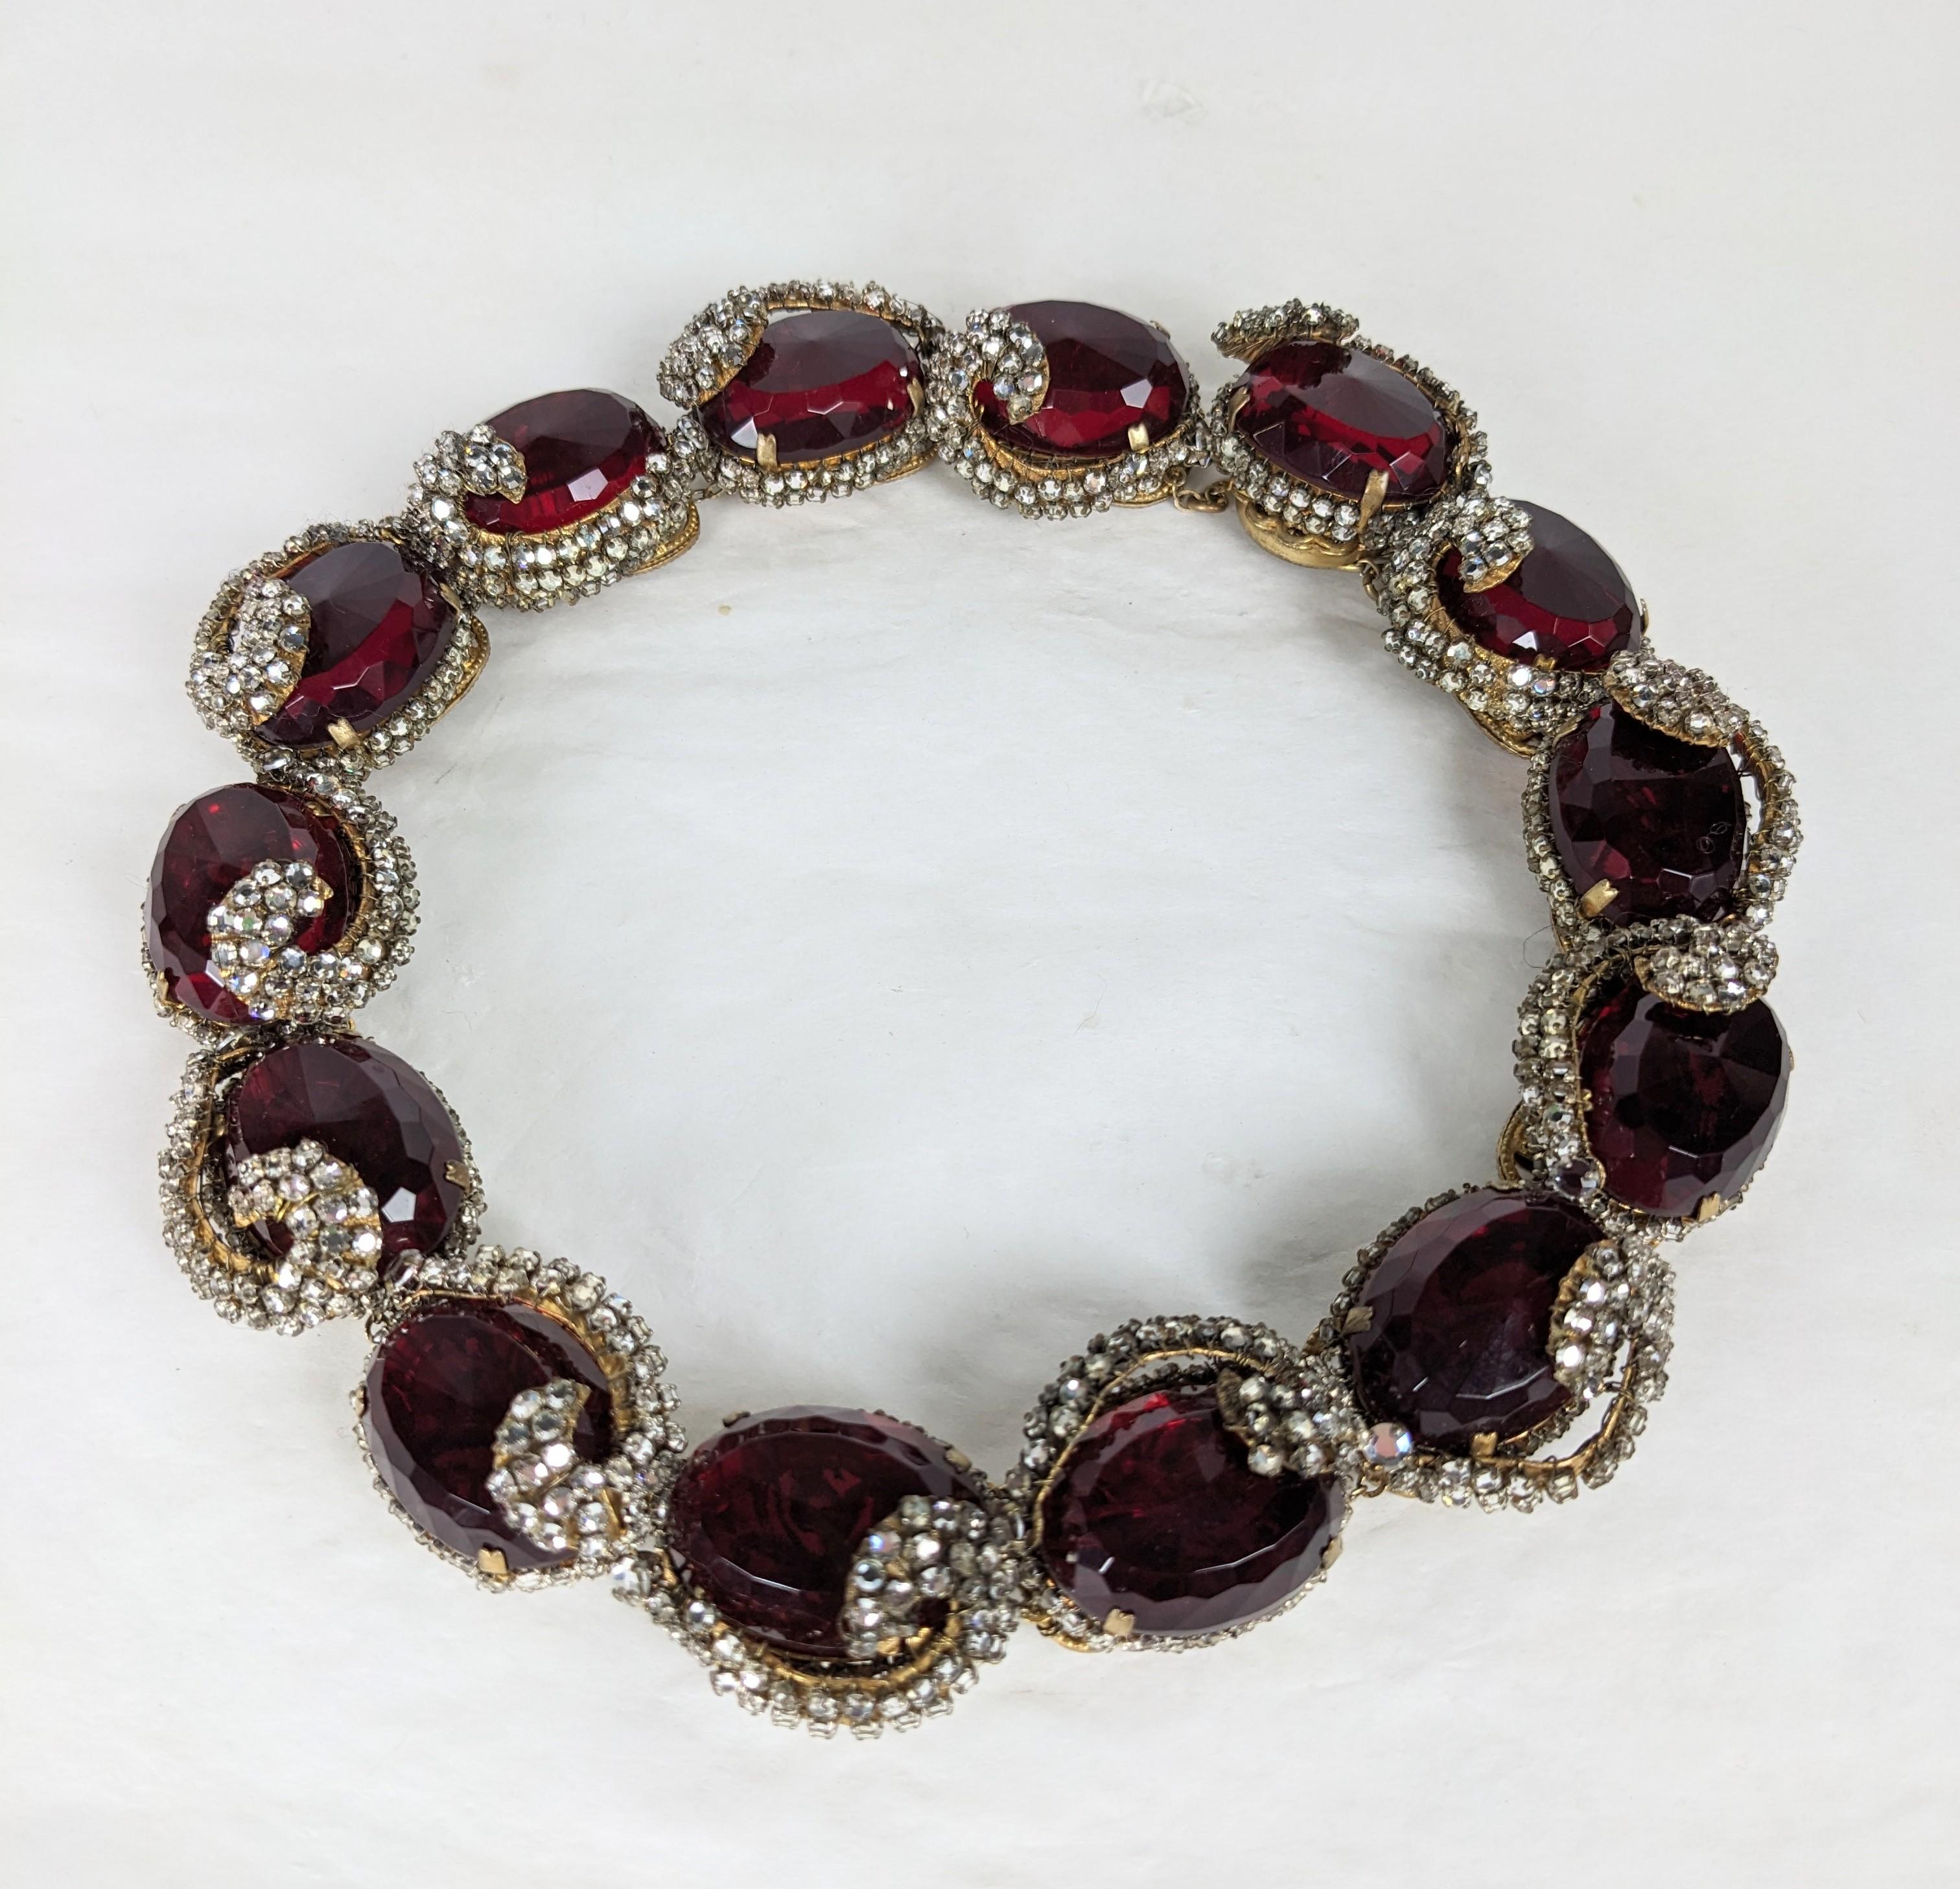 Rare and Special Collector Quality Miriam Haskell Ruby Collar with Elaborate Rose Montee Crystal Swirl Decoration from the 1940's. Extraordinary craftsmanship, hand sewn with hundreds of rose montee crystals onto signature Russian gilt filigrees.